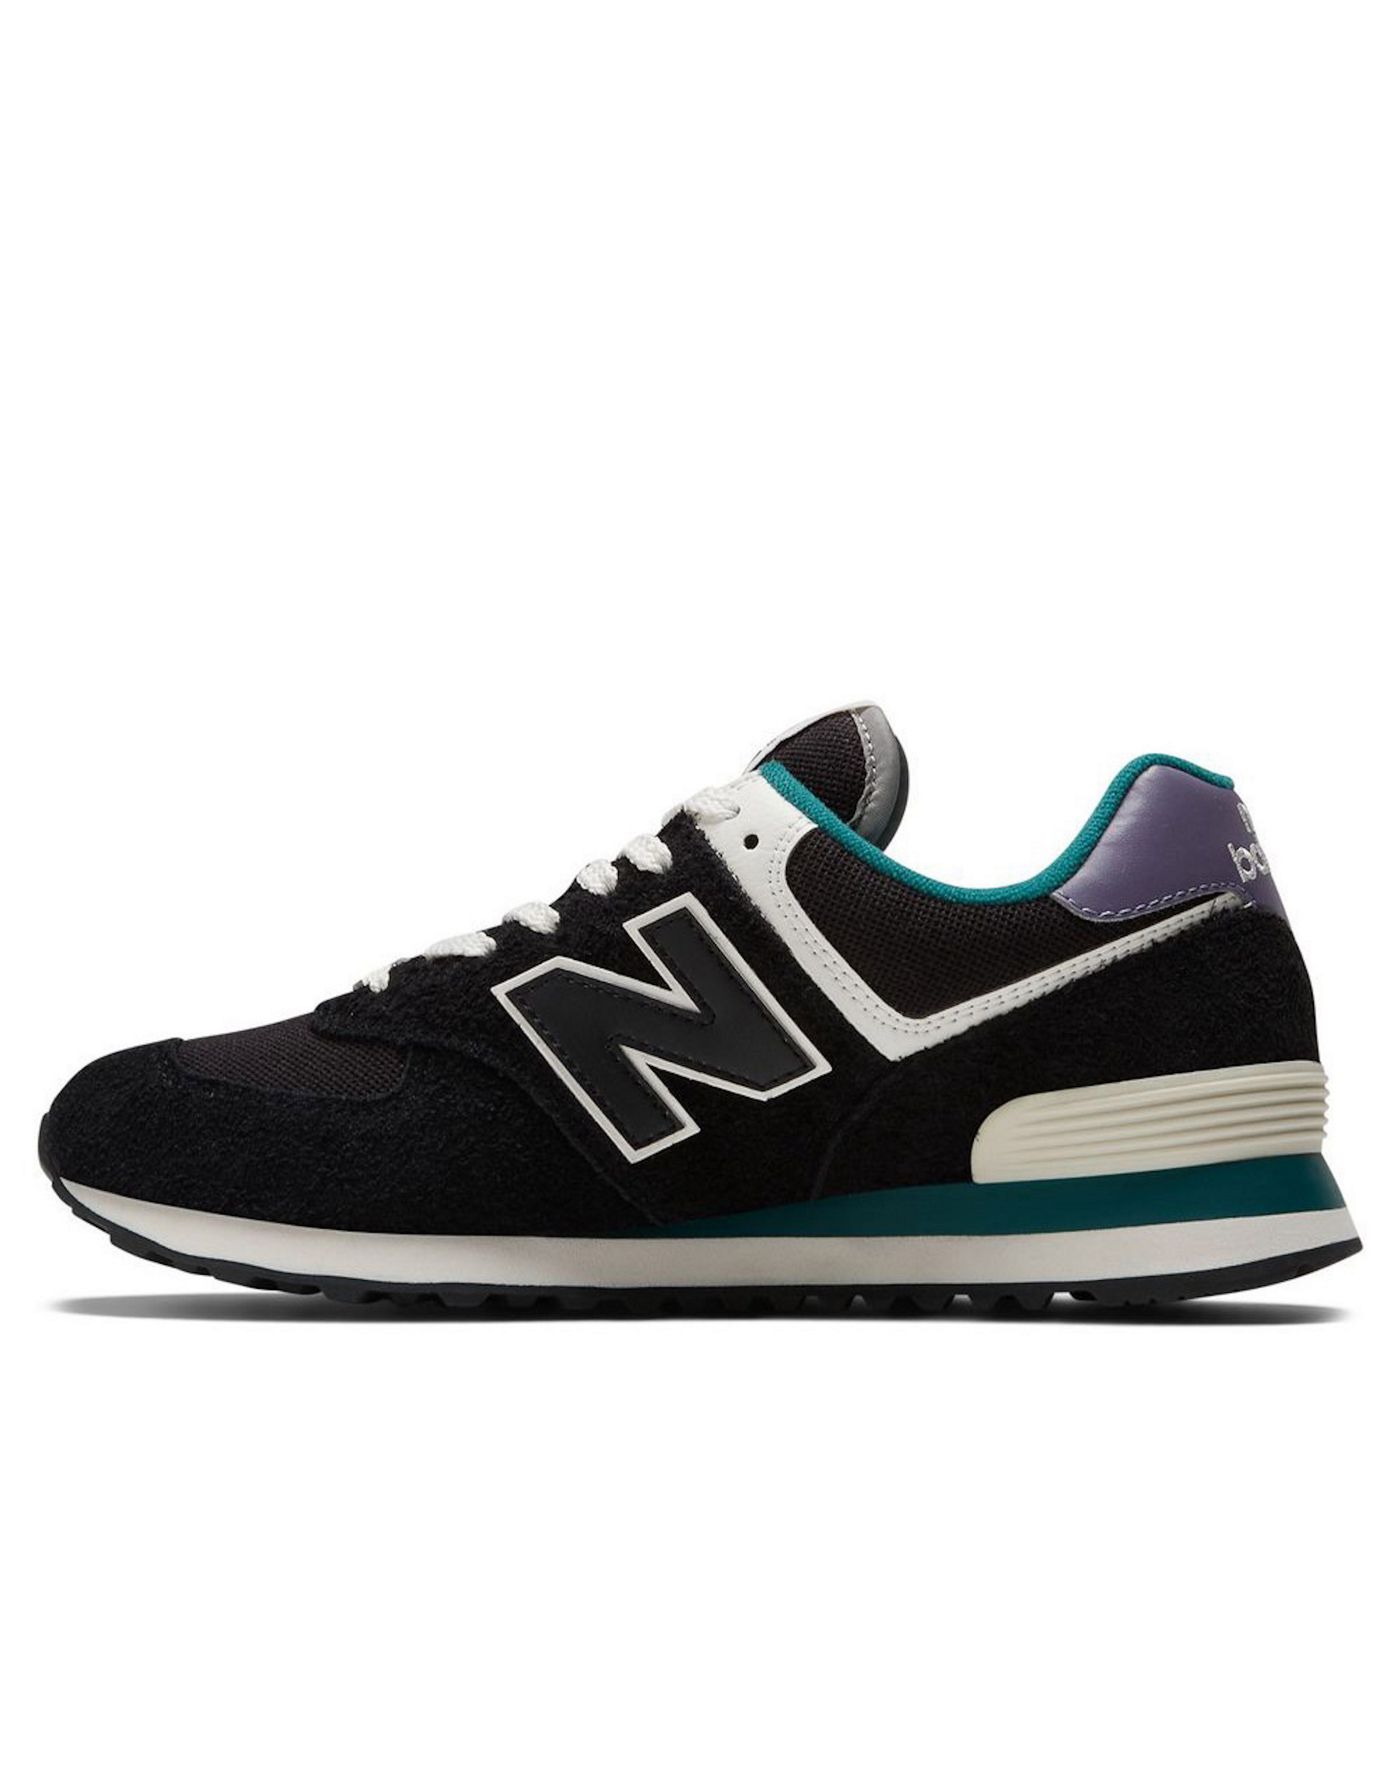 New Balance 574 trainers in black